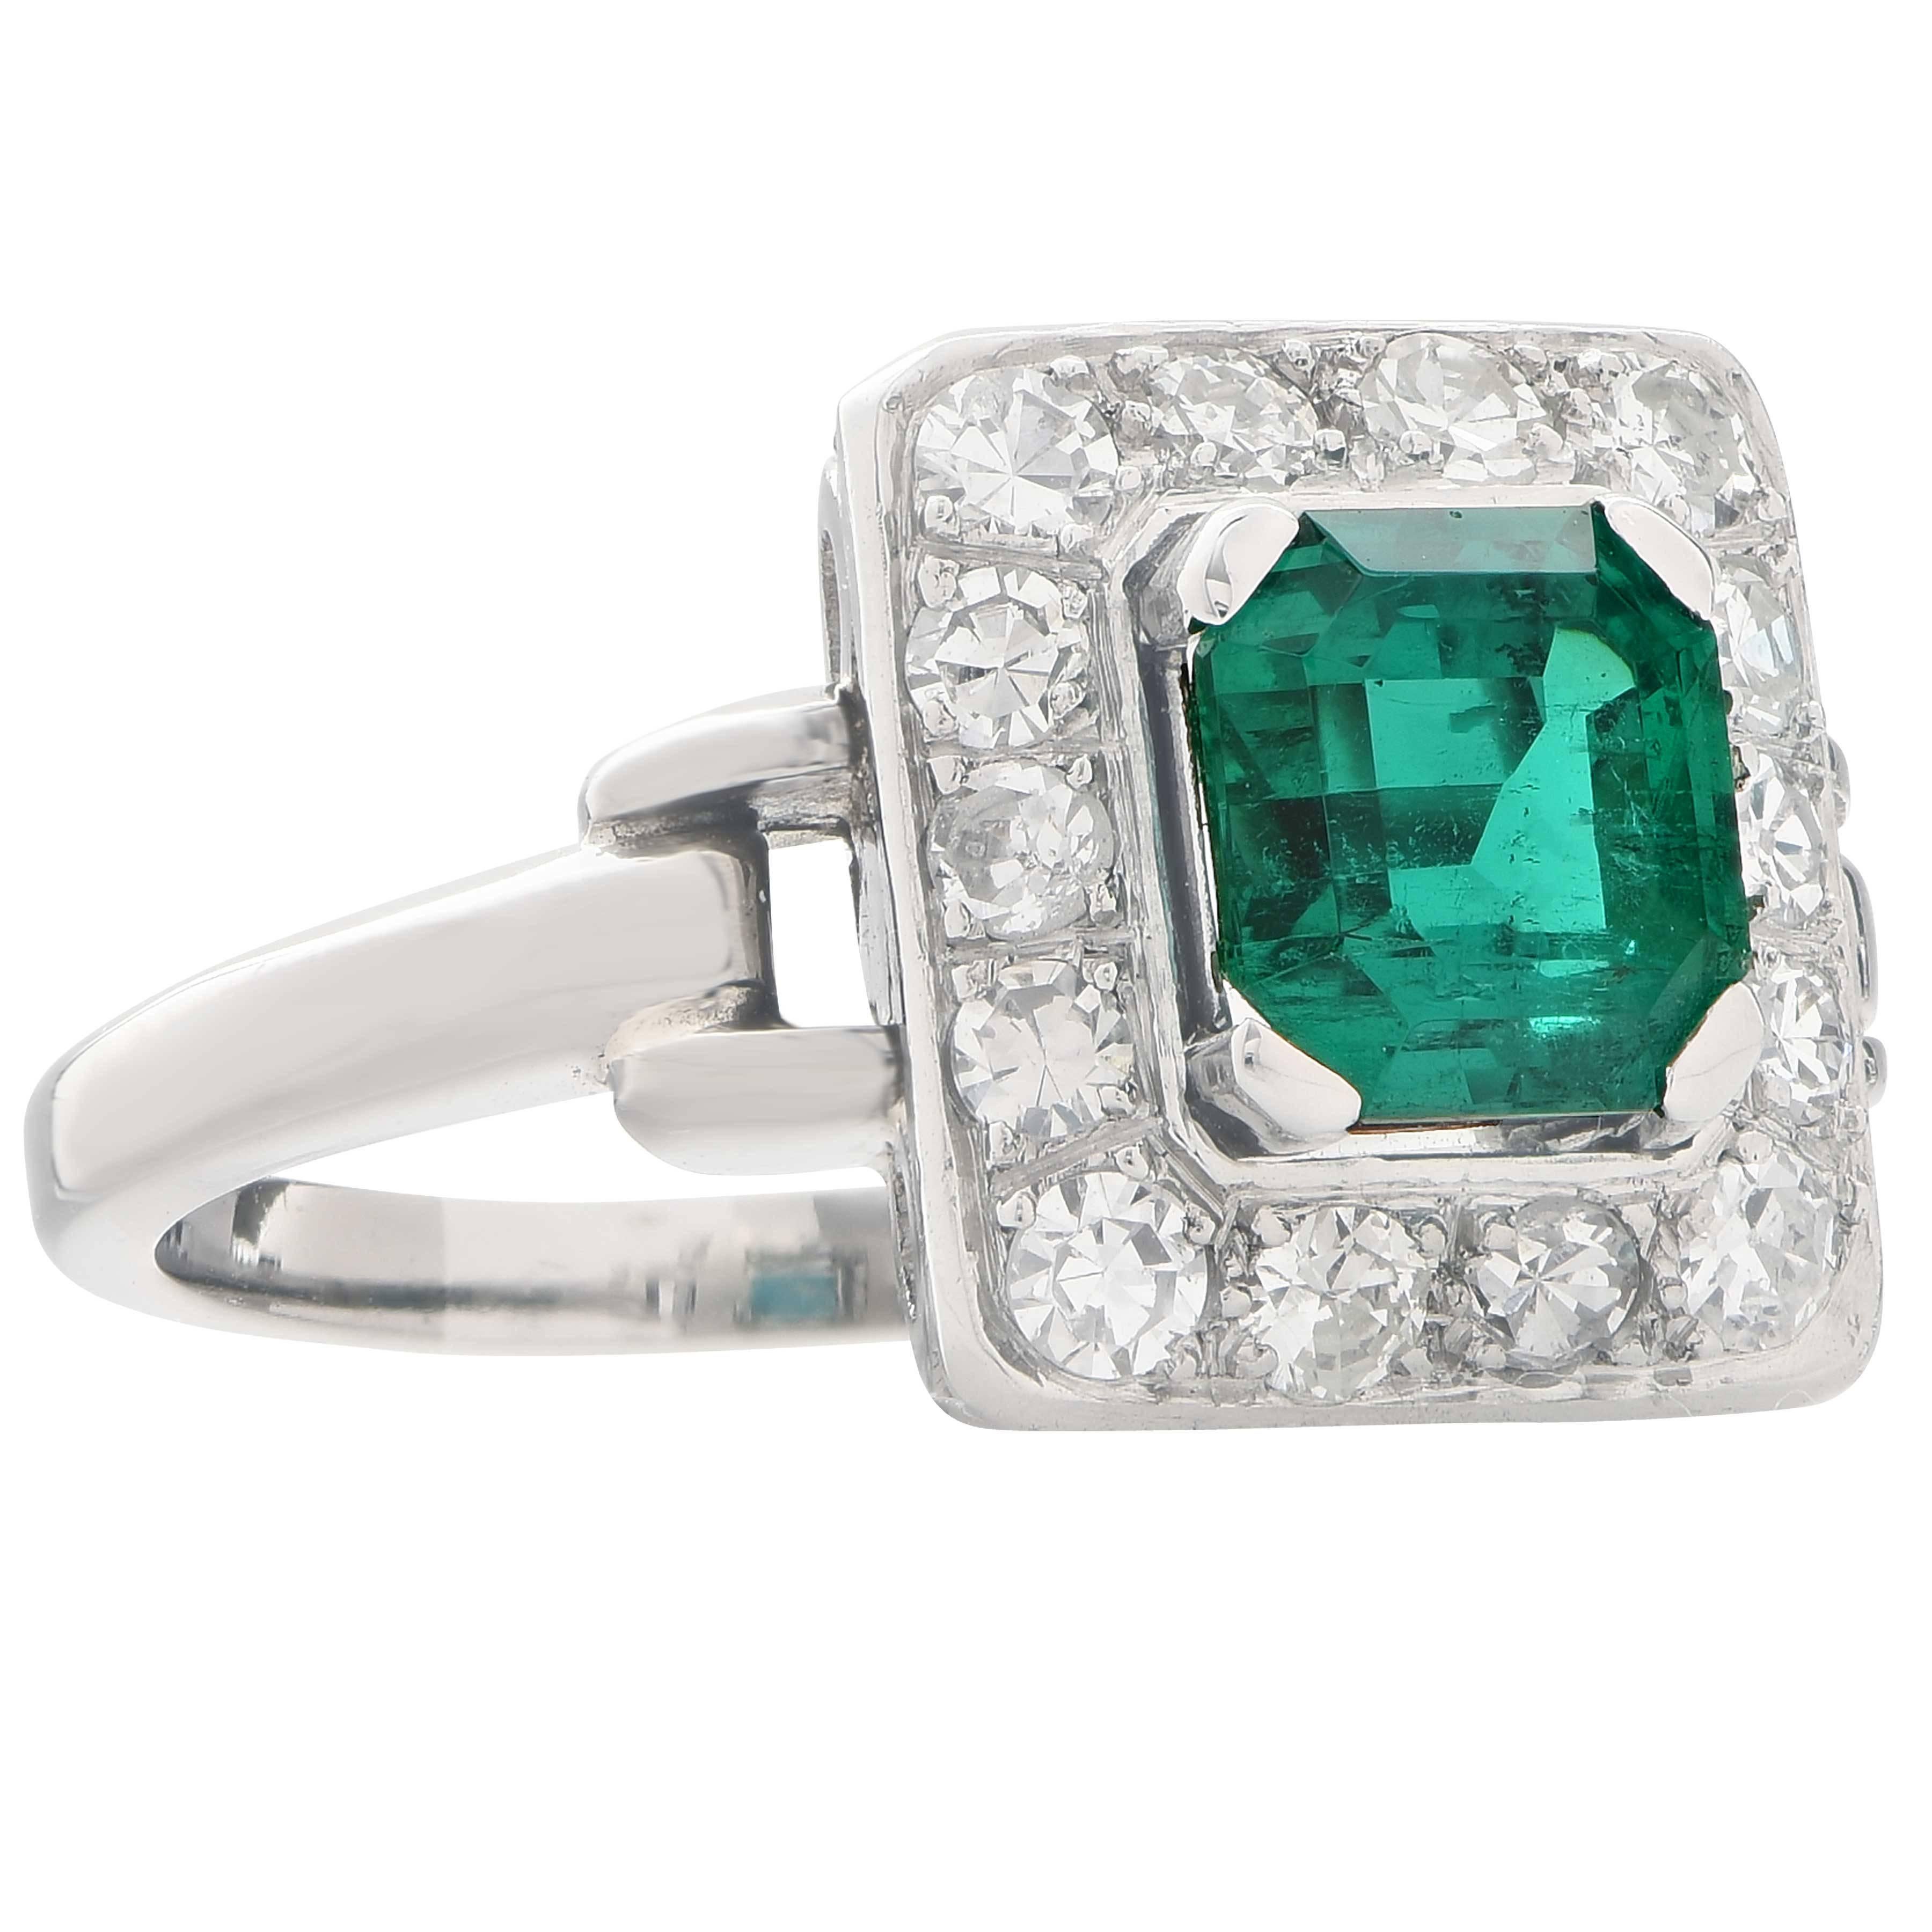 1.36 Carat Colombian Emerald No Treatment AGL Diamond Ring In Excellent Condition For Sale In Bay Harbor Islands, FL